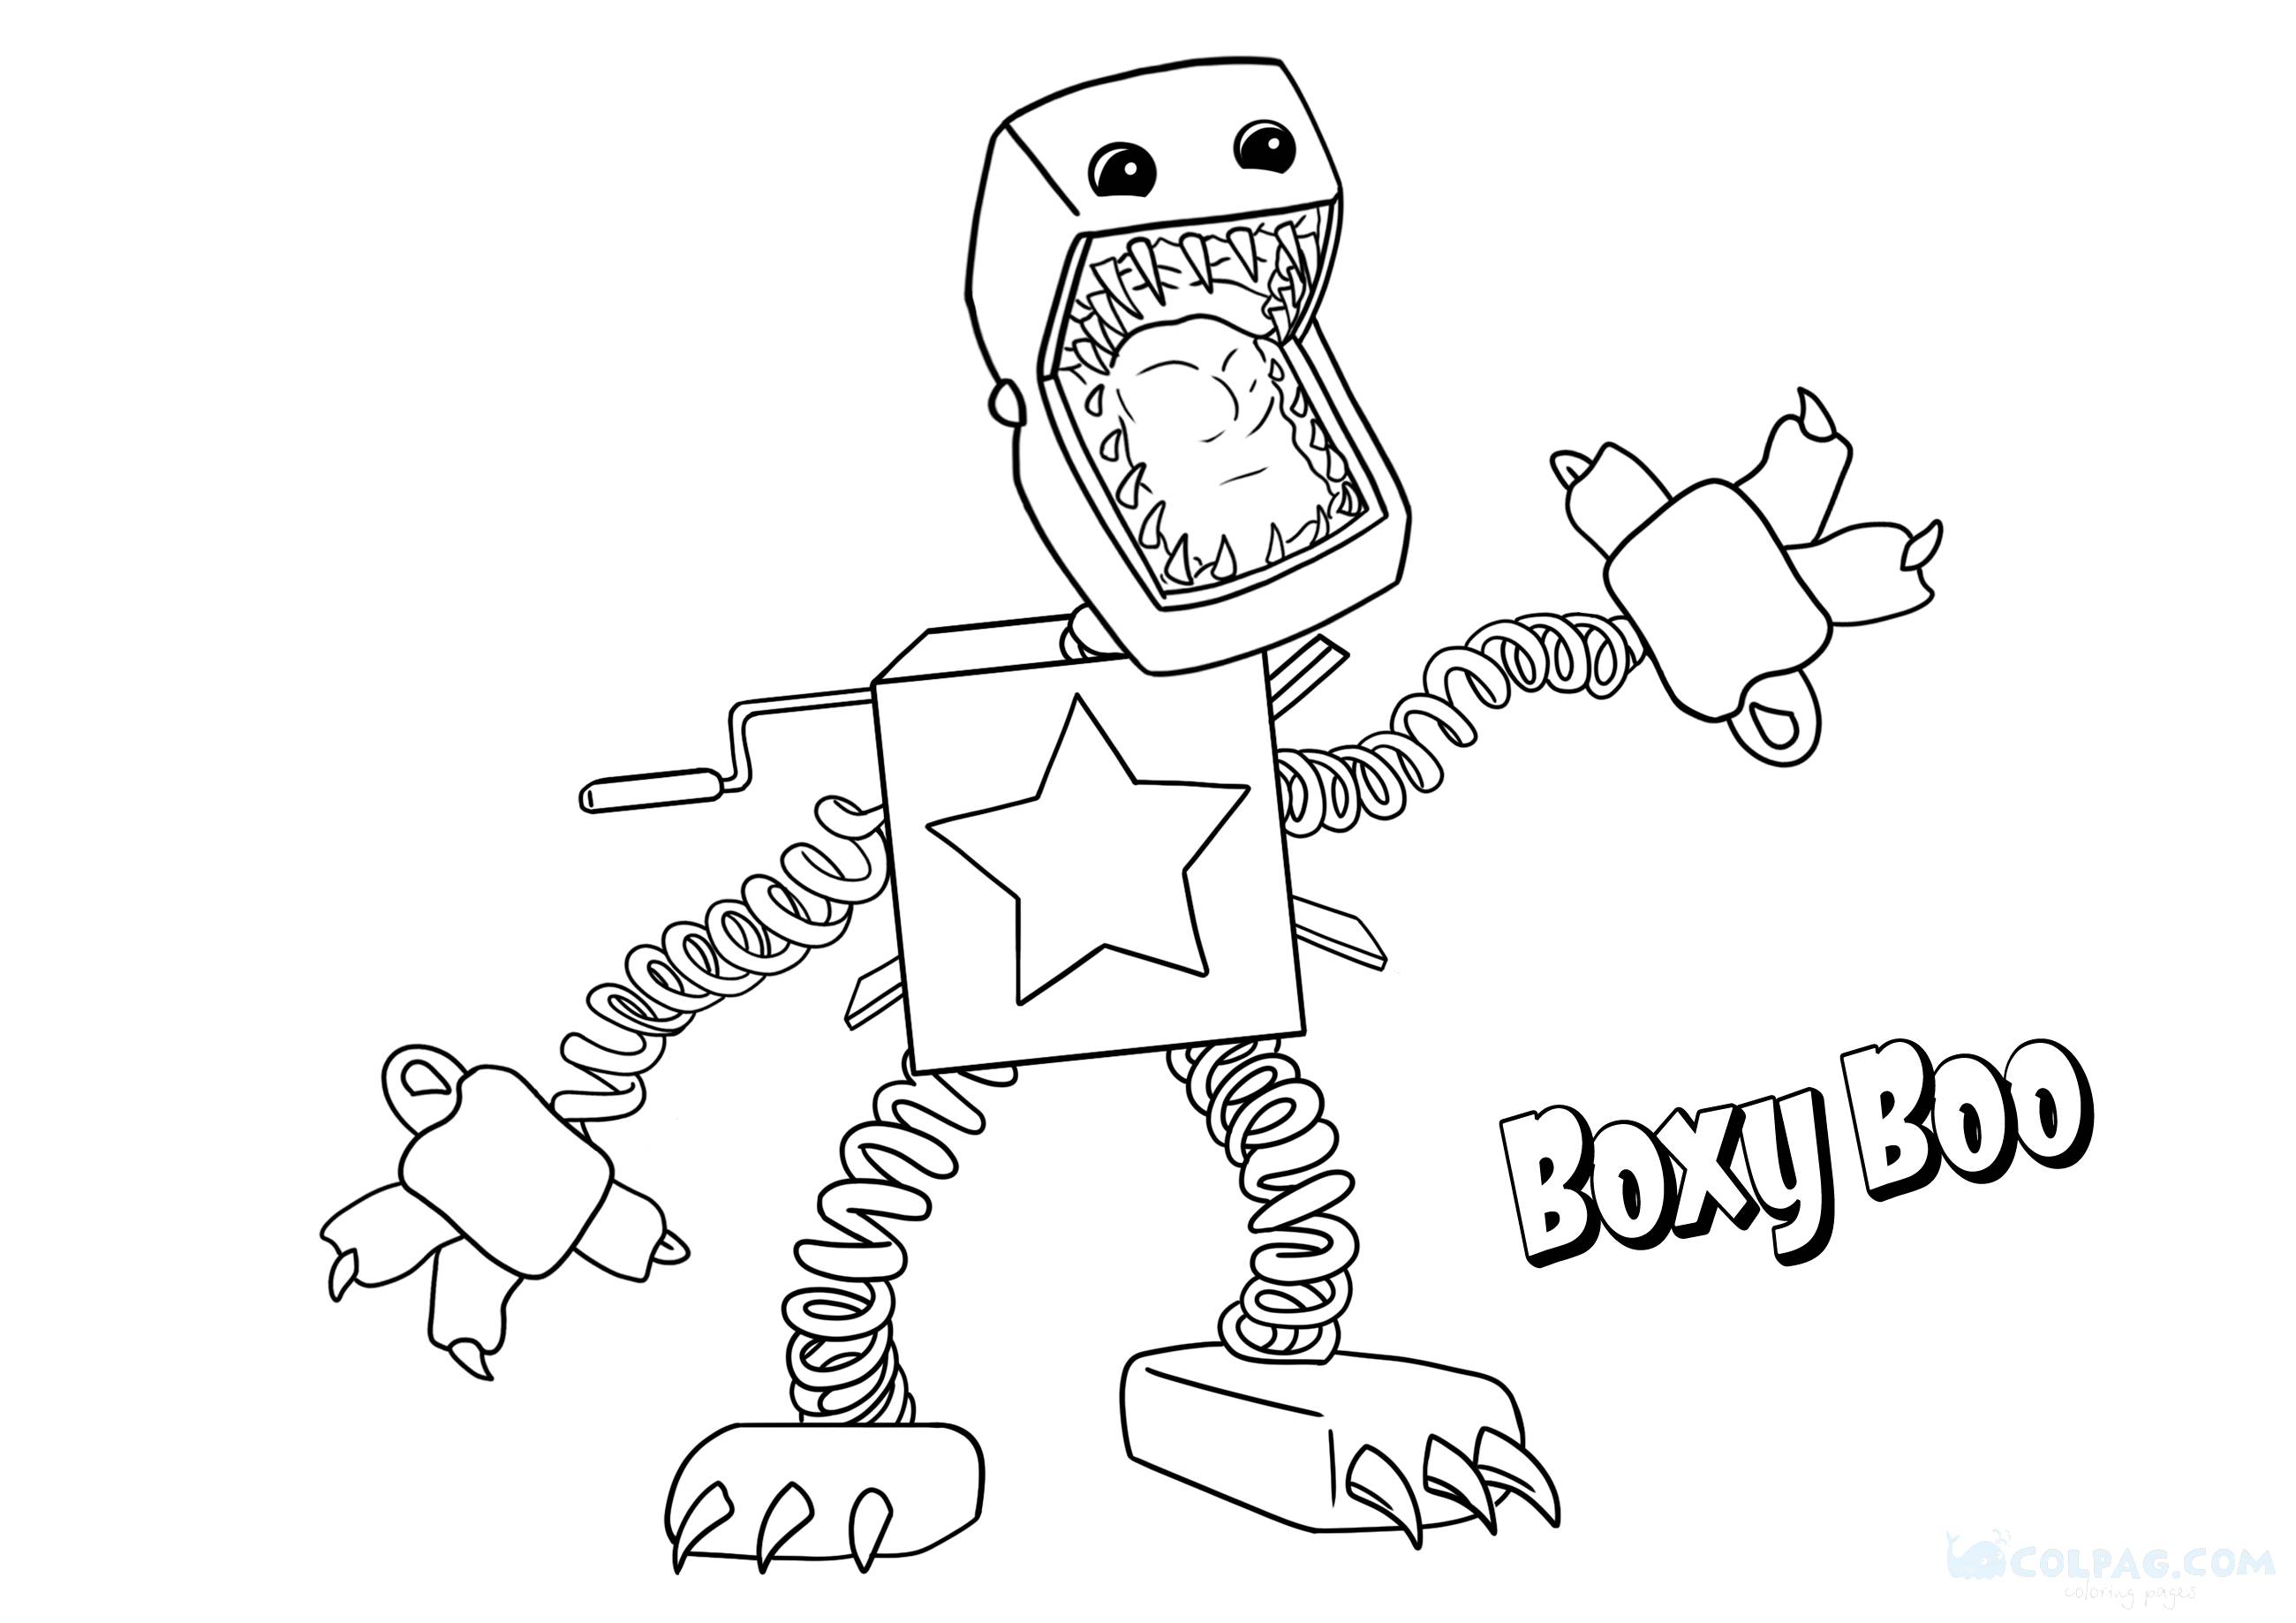 Coloriages de Boxy Boo (Projet: Playtime)